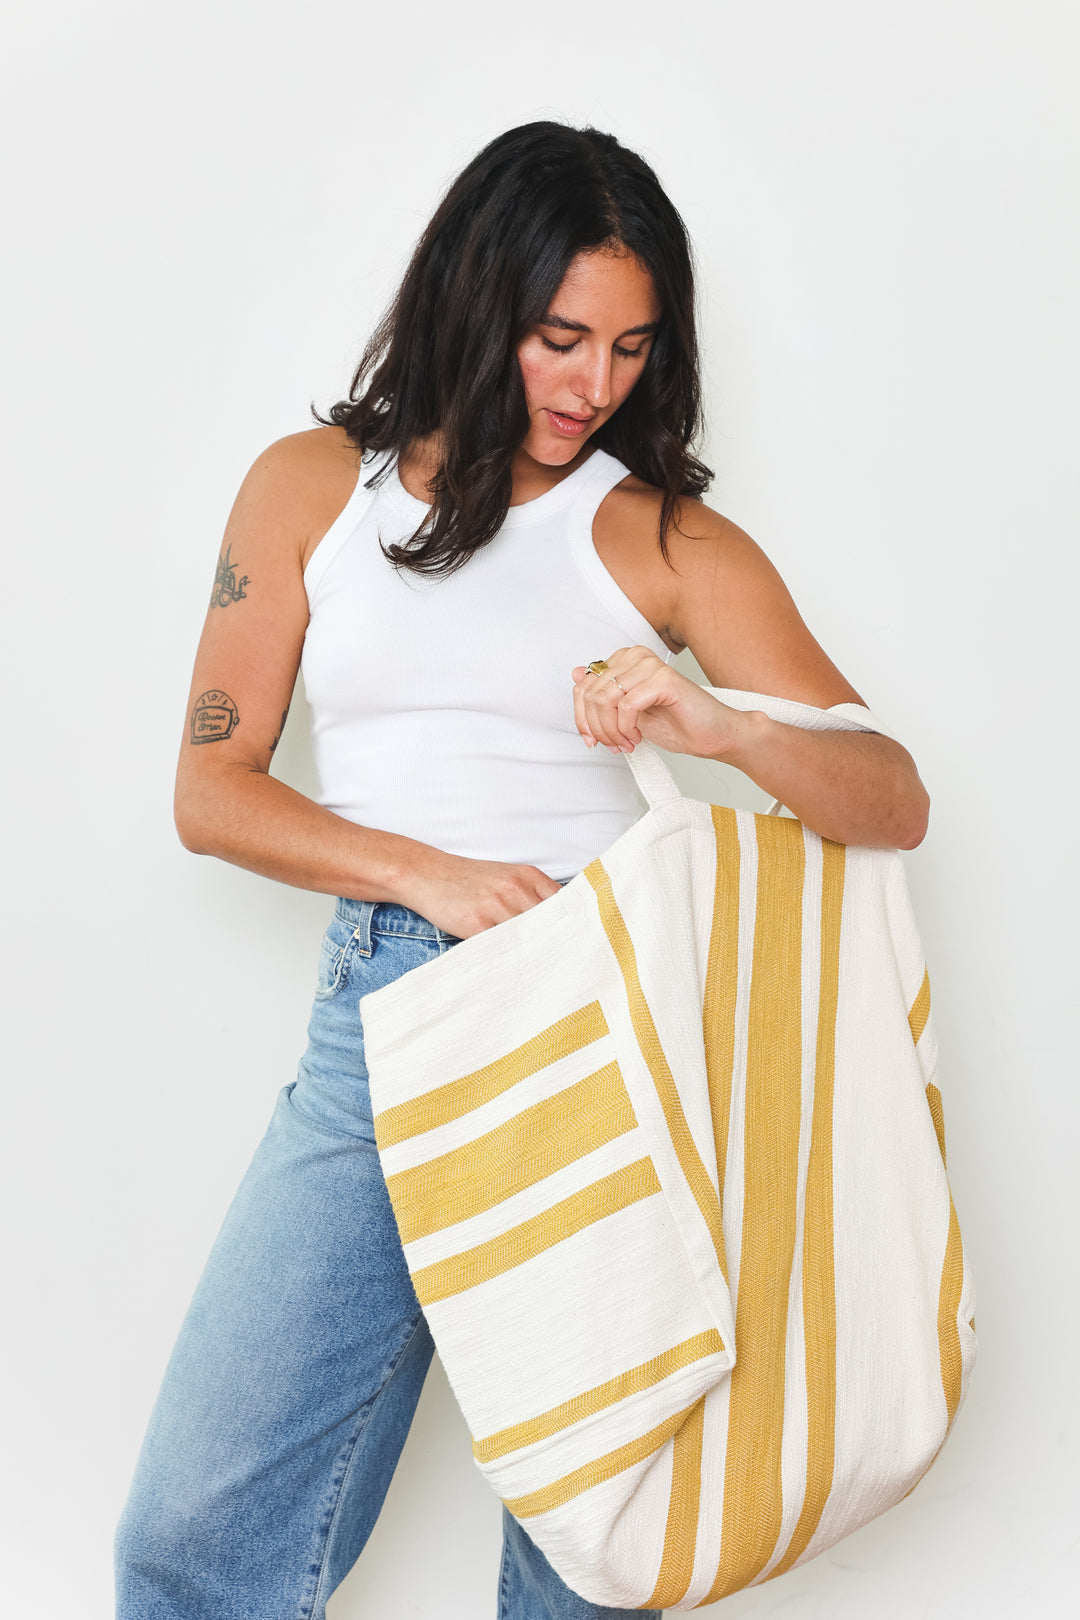 The Rey Tote Bag - Gold